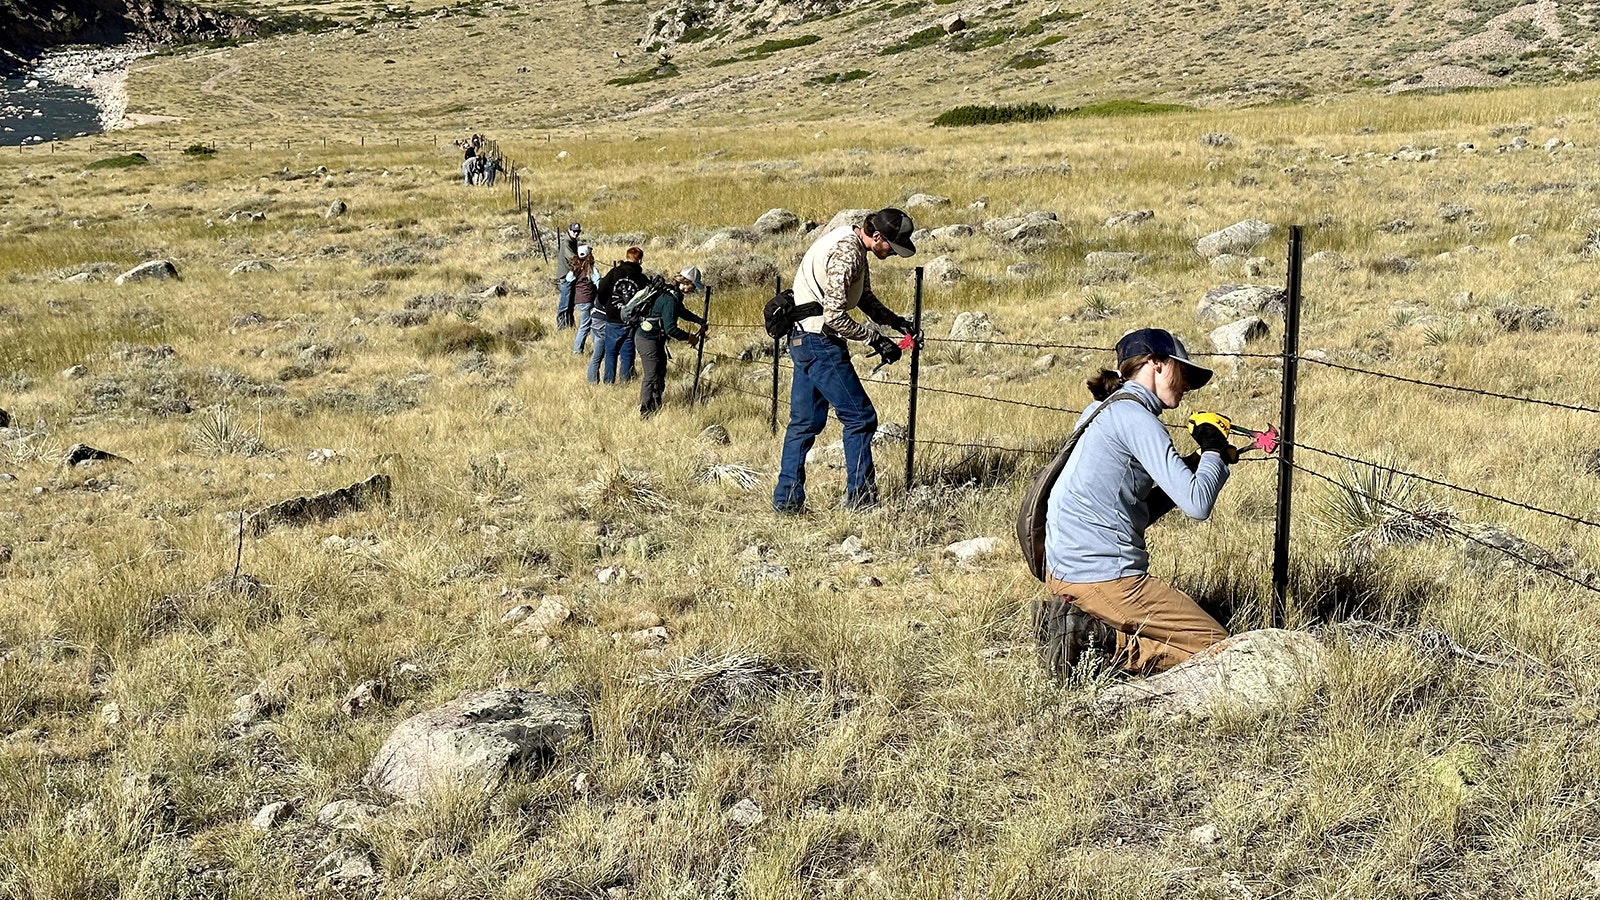 Volunteers improving right-of-way fencing in the Clarks Fork Canyon during an Absaroka Fence Initiative workday. The canyon is a natural migration corridor for bighorn sheep, but the fencing inhibits their movement, being too low and too high for them to cross easily.